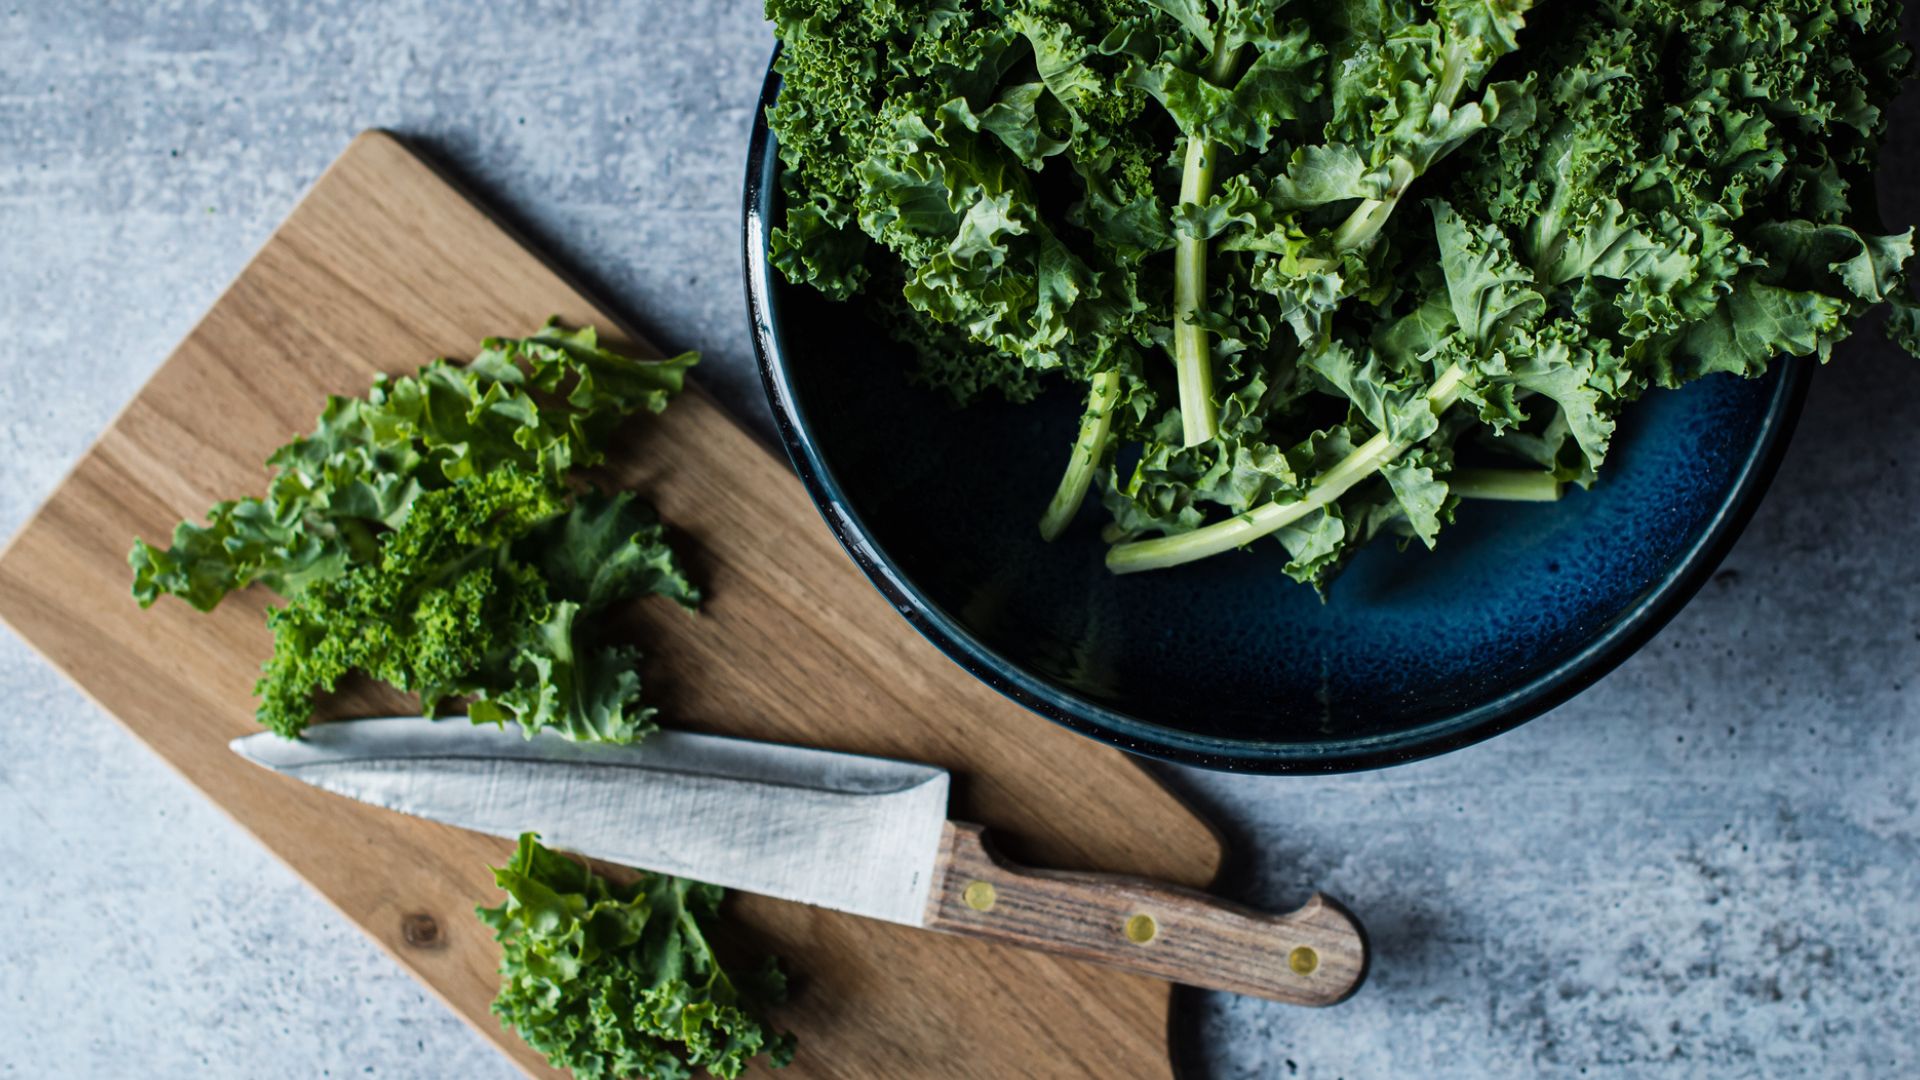 Bowl of crunchy kale next to wooden chopping board and steel knife